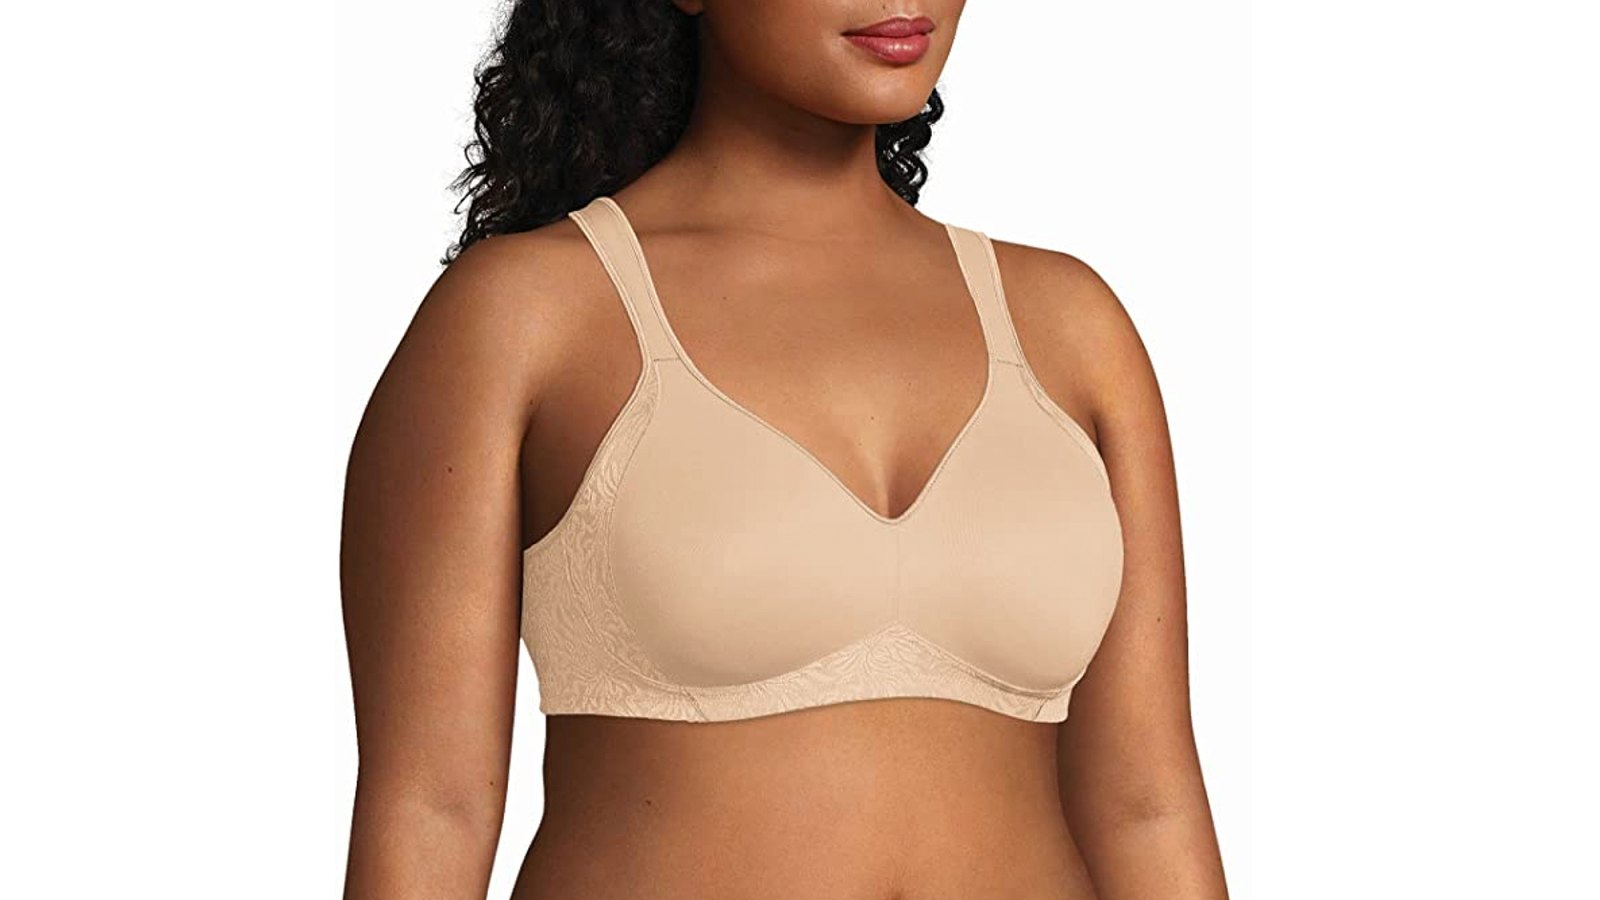 https://www.usmagazine.com/wp-content/uploads/2021/11/Playtex-Womens-18-Hour-Seamless-Smoothing-Full-Coverage-Bra.jpg?crop=0px%2C0px%2C2000px%2C1131px&resize=1600%2C900&quality=86&strip=all